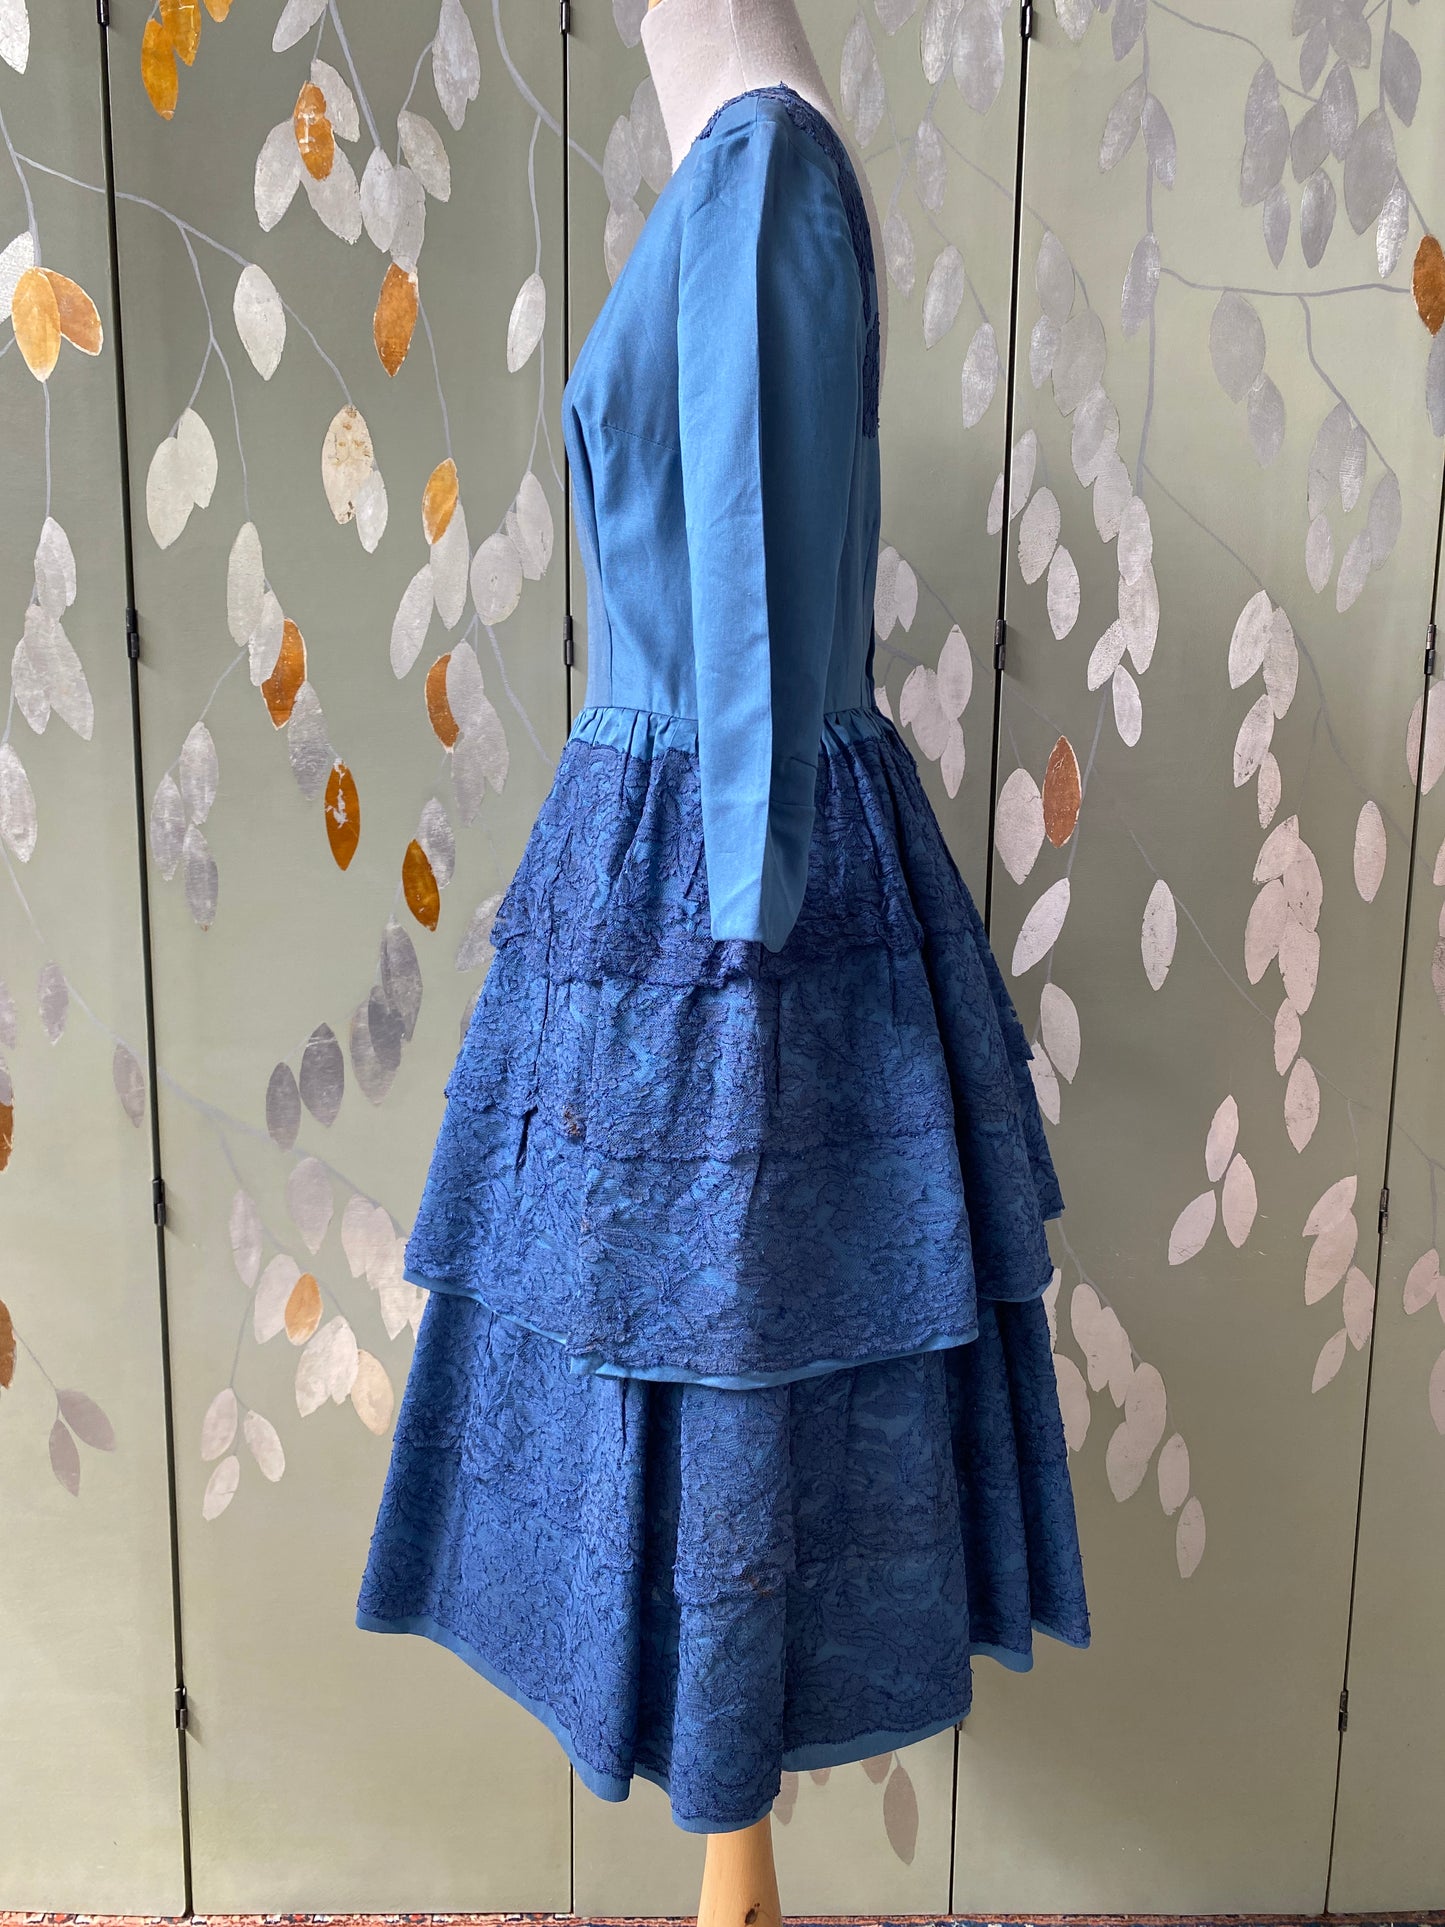 Vintage 1950s Blue Tiered Cocktail Dress, Small